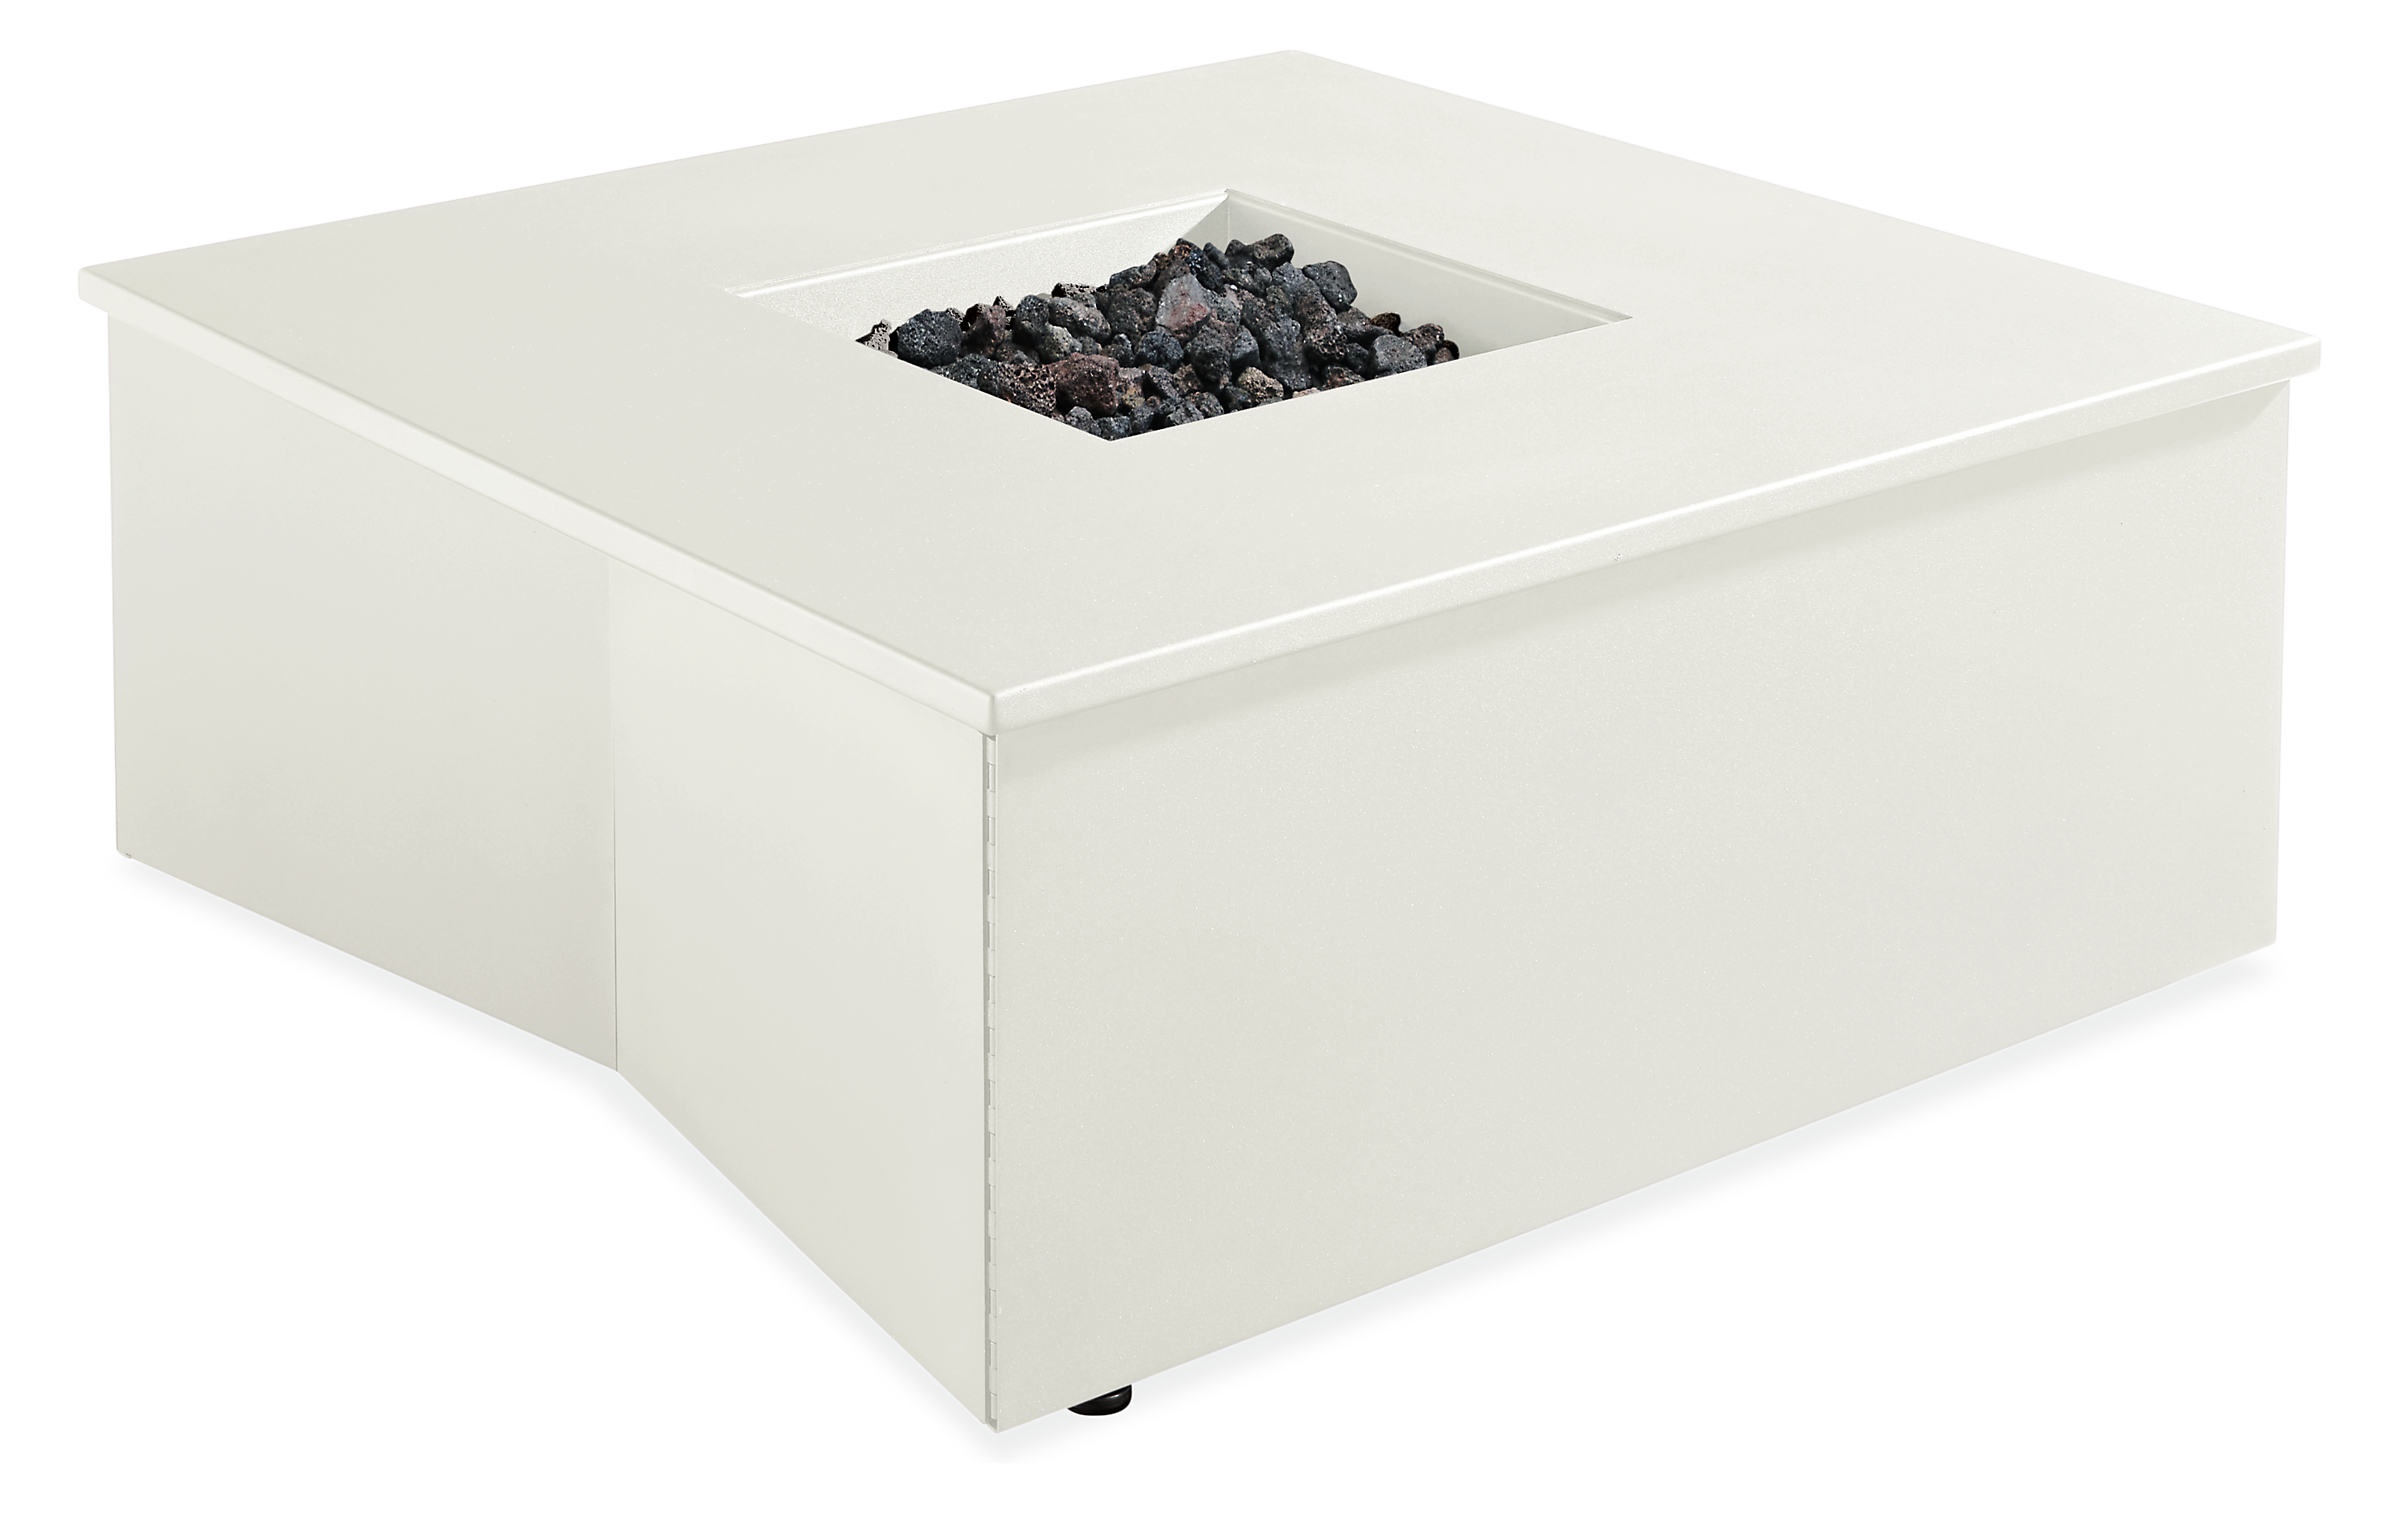 Adara 37w 37d 15h Outdoor Fire Table with Propane Tank in White